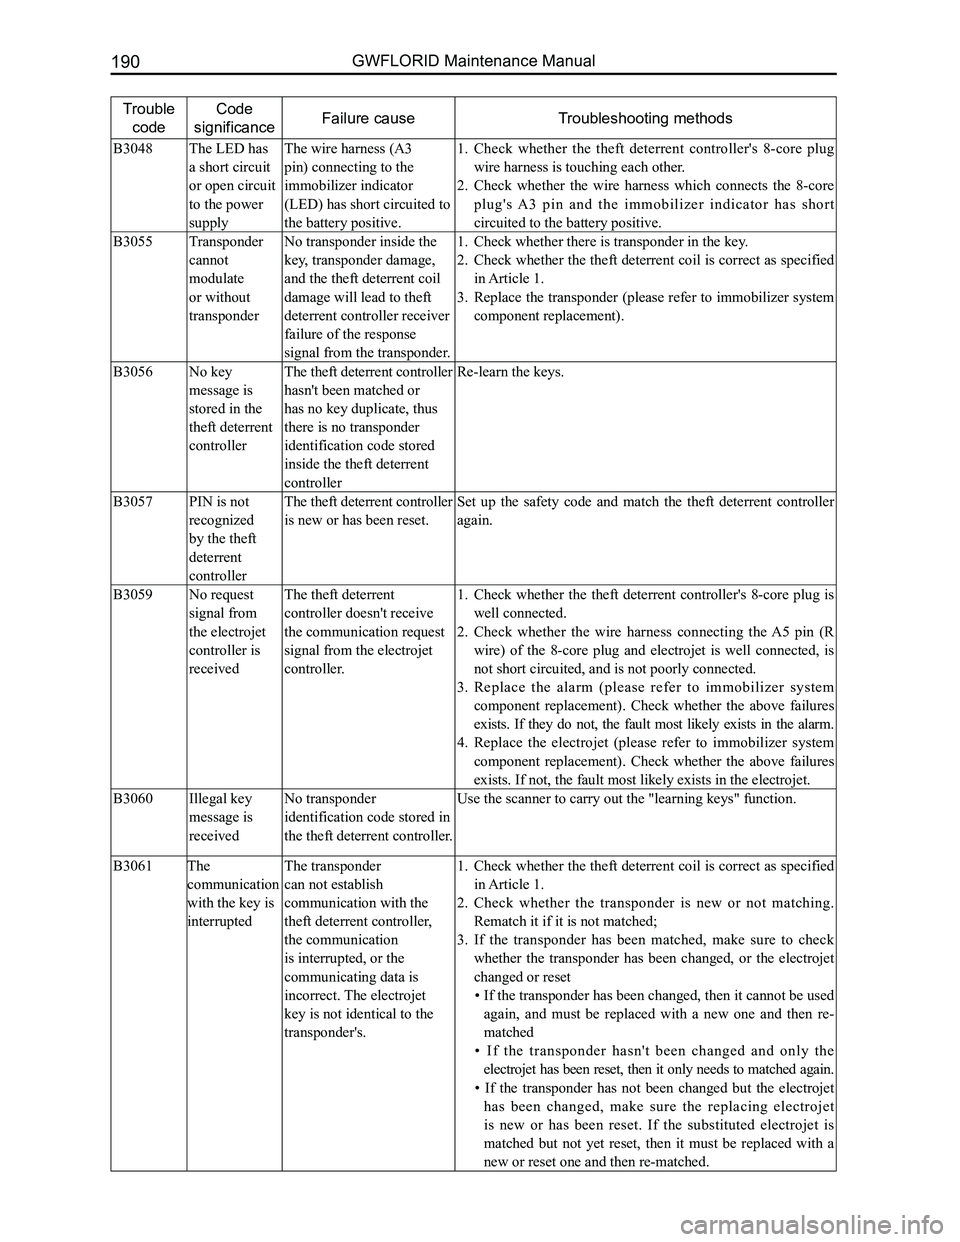 GREAT WALL FLORID 2008  Service Manual Downloaded from www.Manualslib.com manuals search engine GWFLORID Maintenance Manual190
Trouble 
code
Code 
significanceFailure causeTroubleshooting methods
B3048The LED has 
a short circuit 
or open 